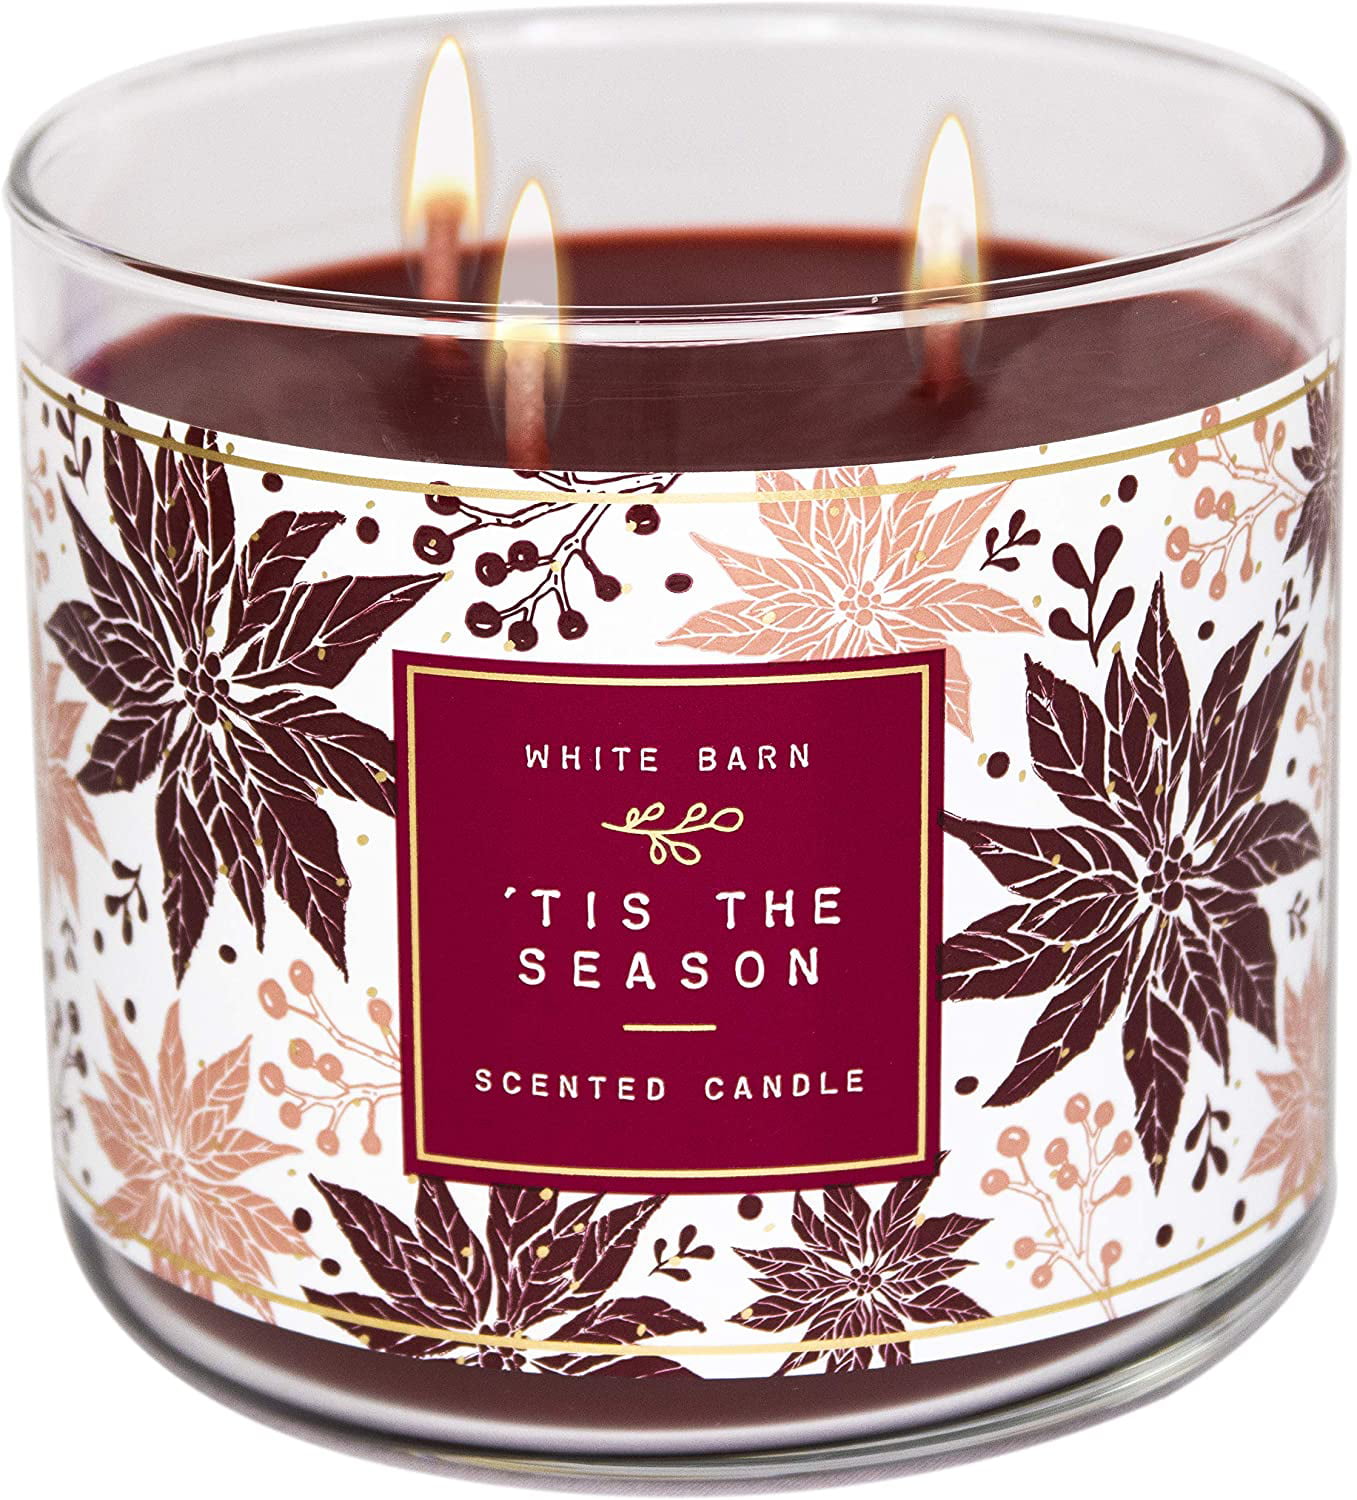 2 BATH & BODY WORKS 'TIS THE SEASON 3 WICK SCENTED HOME CANDLE 14.5 OZ LARGE NEW 